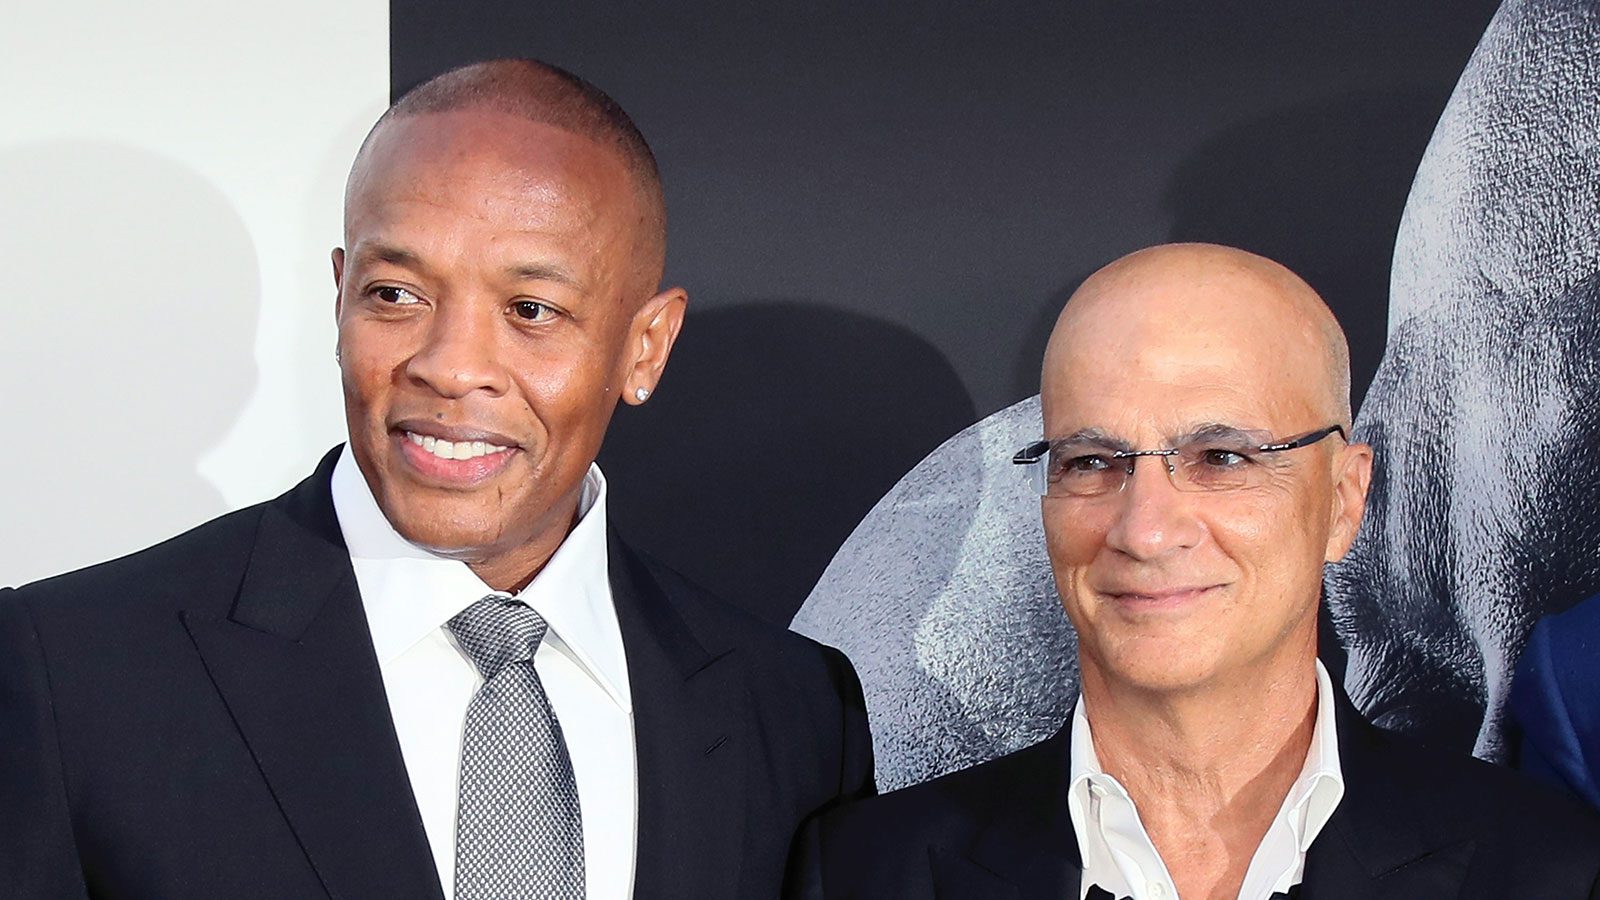 New school planned by Dr. Dre & Jimmy Iovine seeks to teach blend of skills to prepare students for real-world jobs